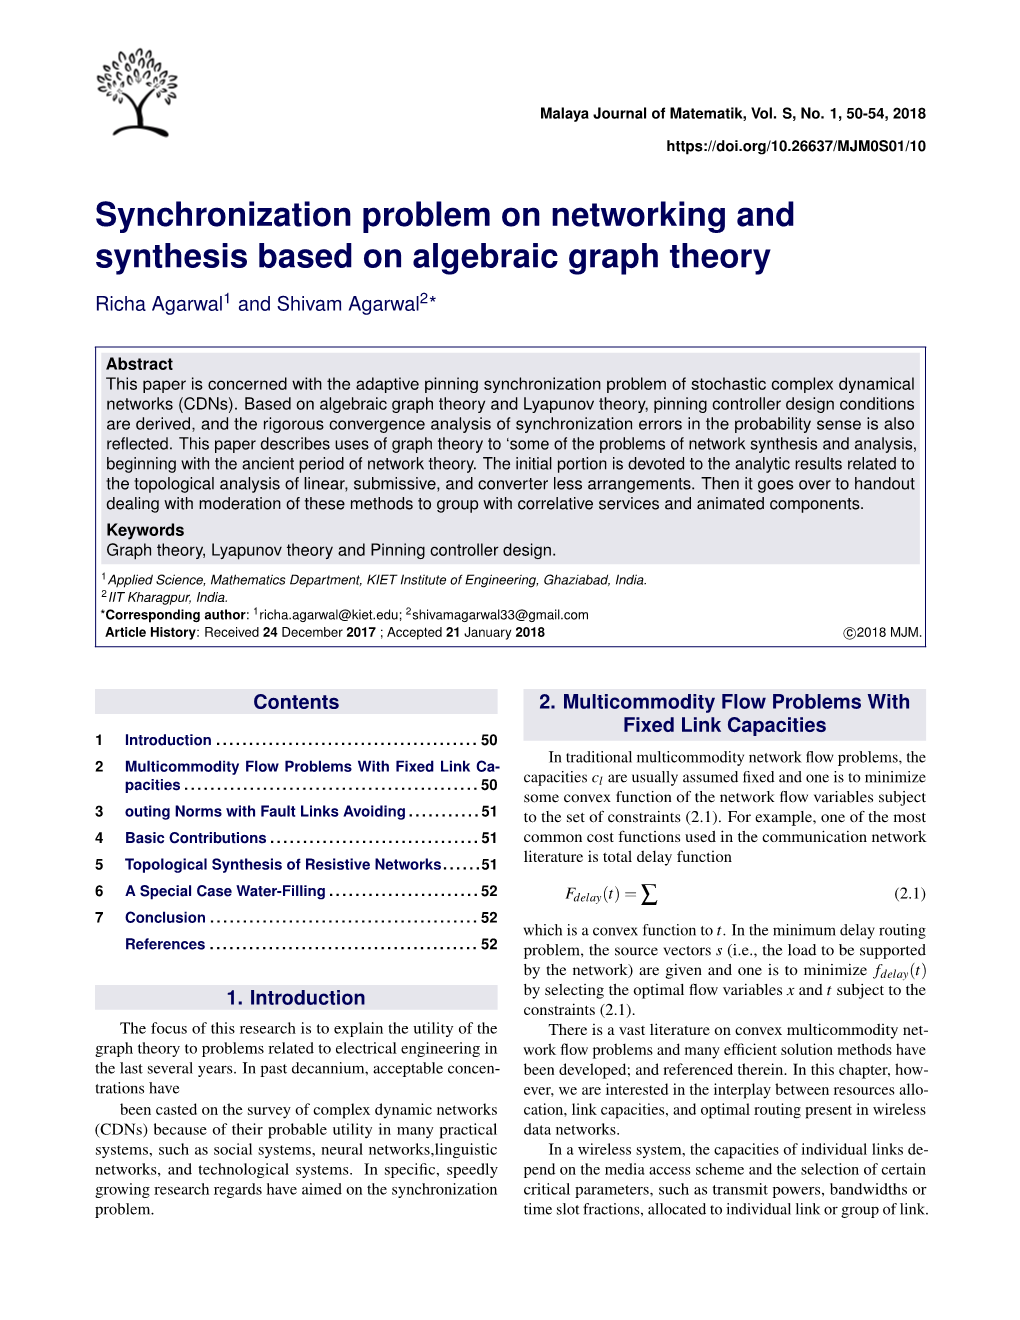 Synchronization Problem on Networking and Synthesis Based on Algebraic Graph Theory